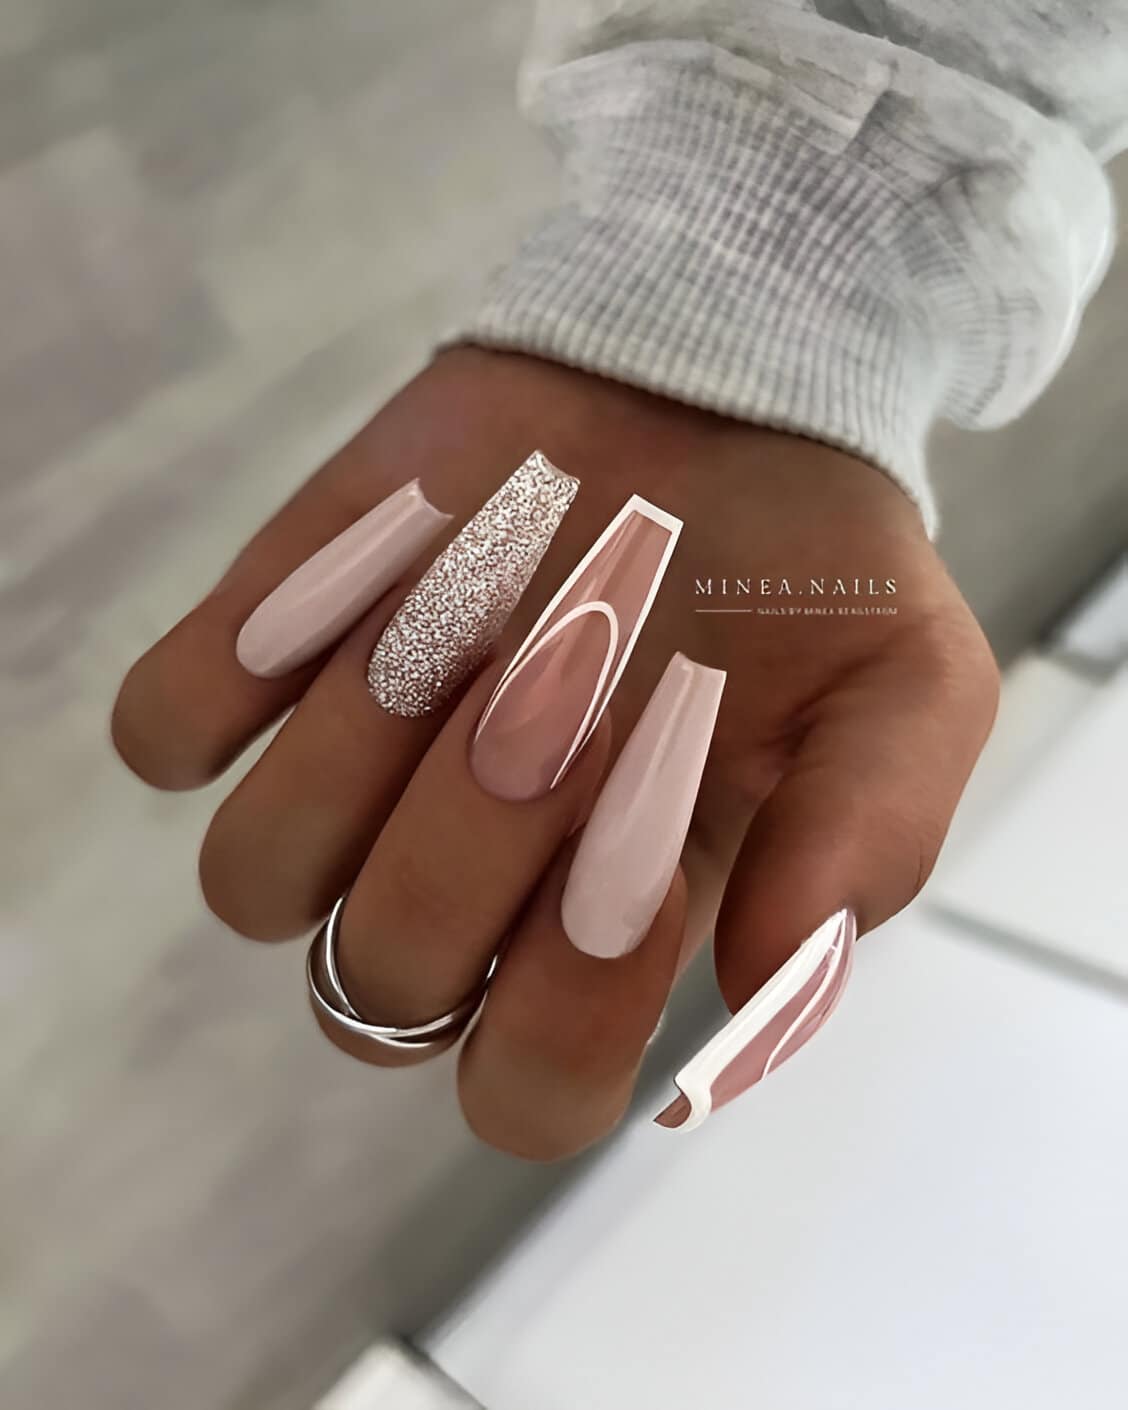 Glittered Pink And White Nails 6